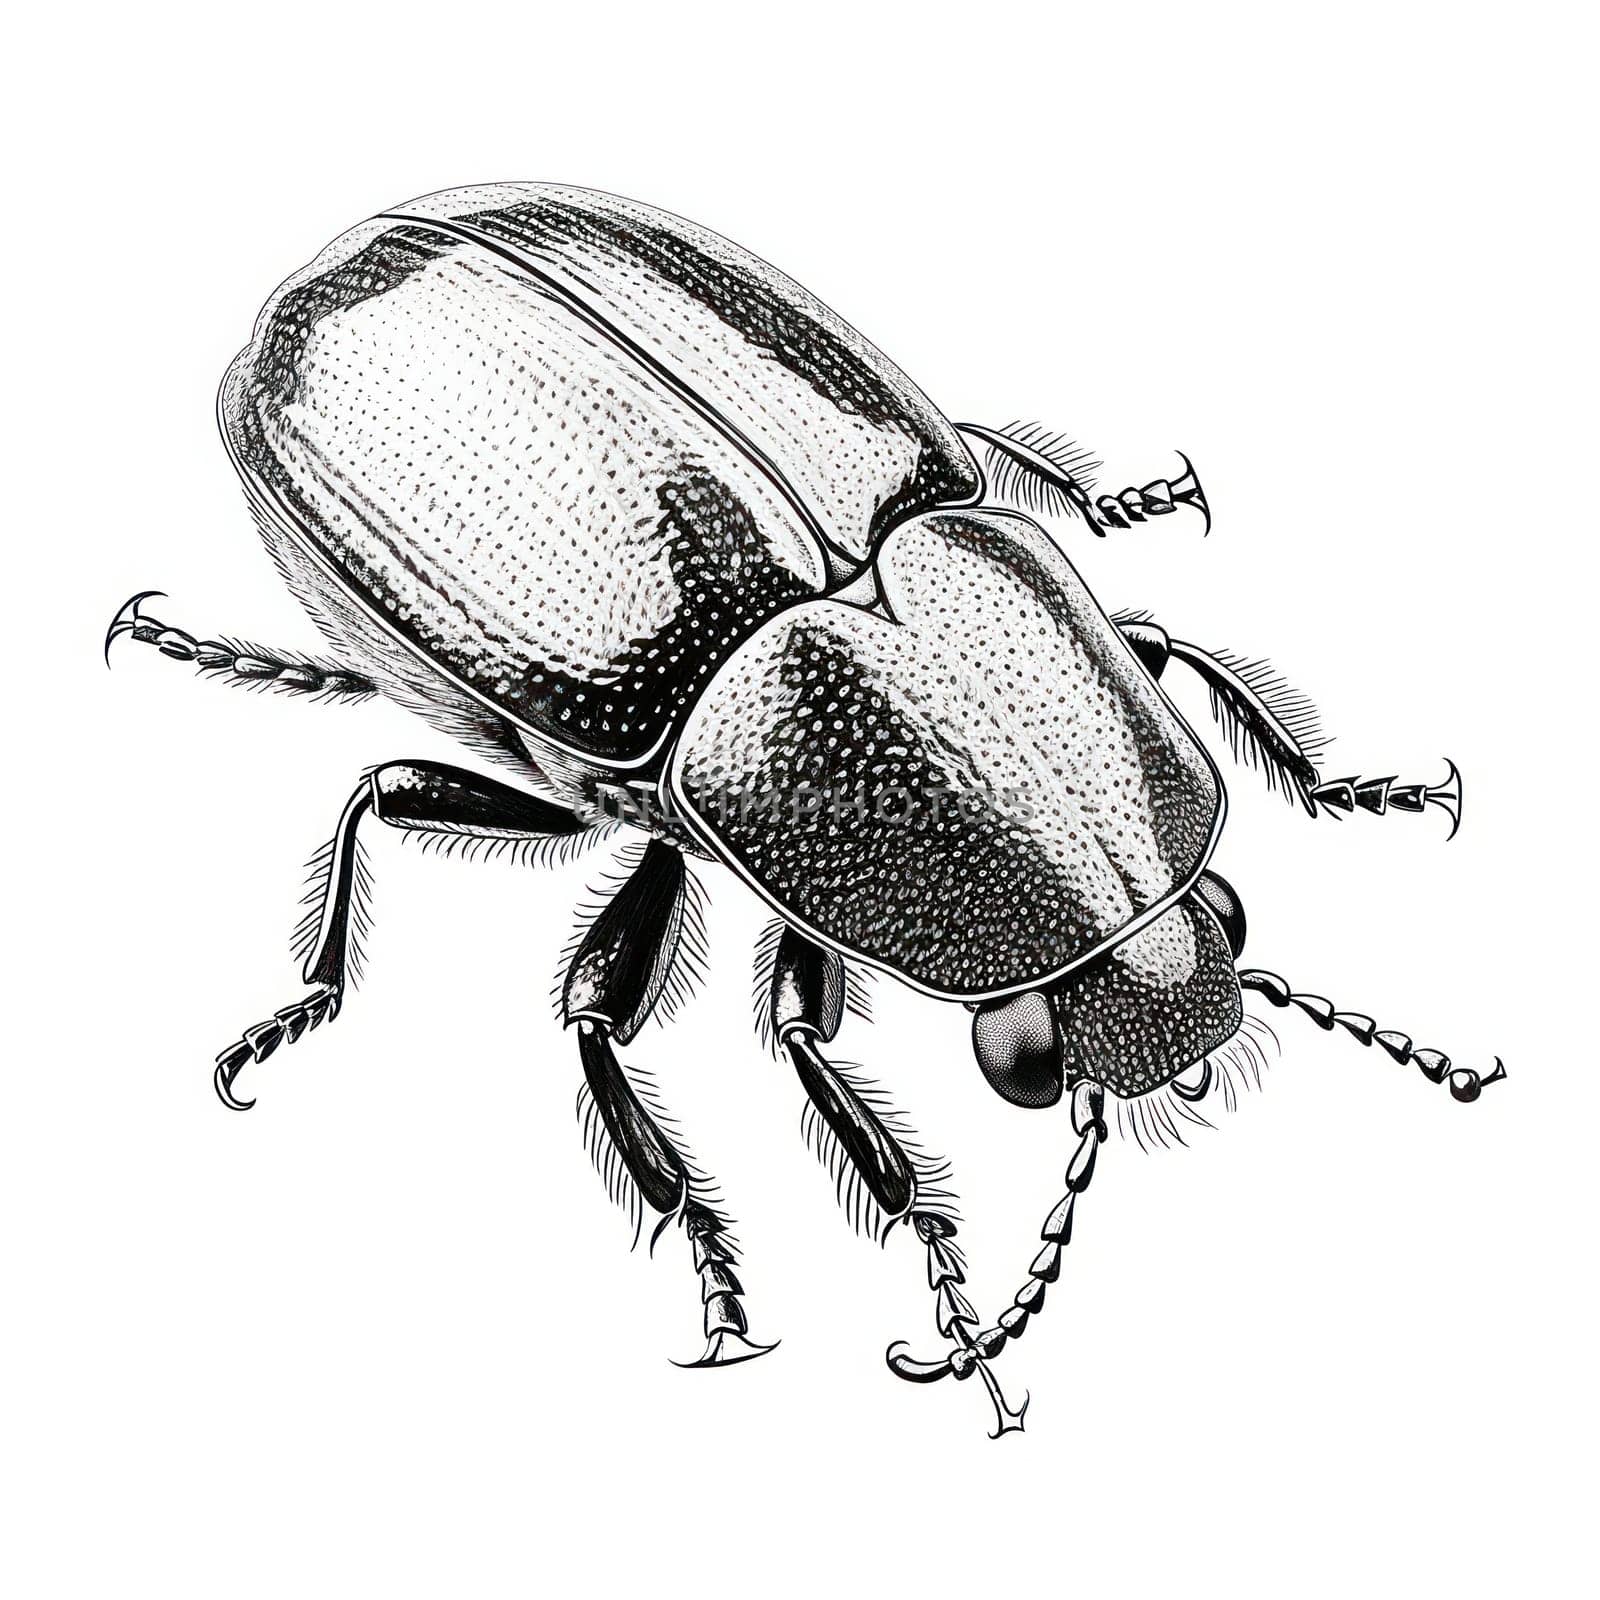 Isolated White Beetle: An Intricate Illustration of a Small, Predatory Insect with Elegant Antennae on a Vintage Engraving-Style Background